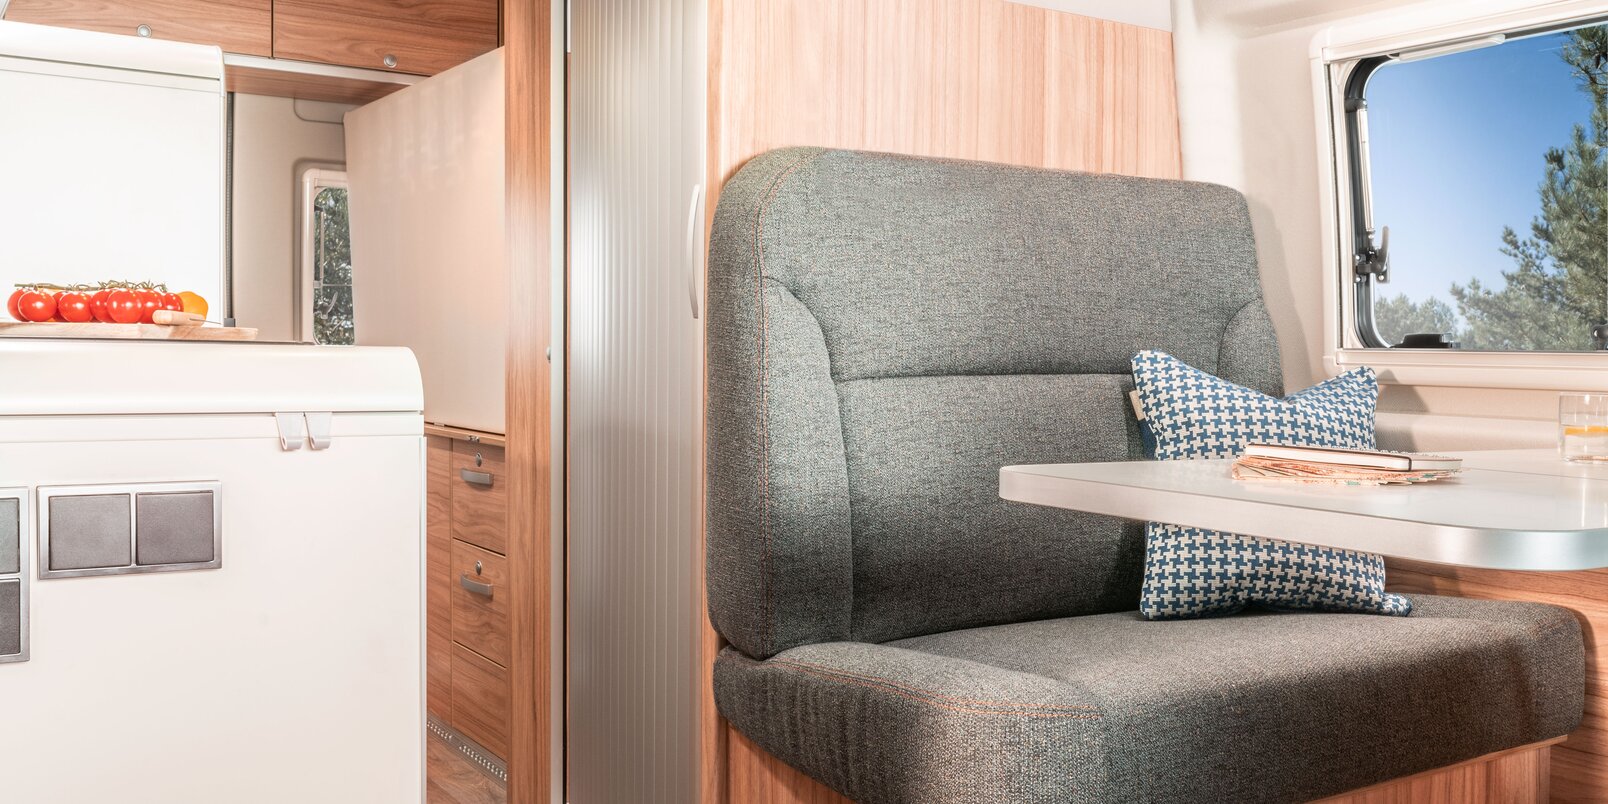 Table, living room bench with decorative cushions, window, overhead storage cupboards and refrigerator in the HYMER Fiat Camper Van